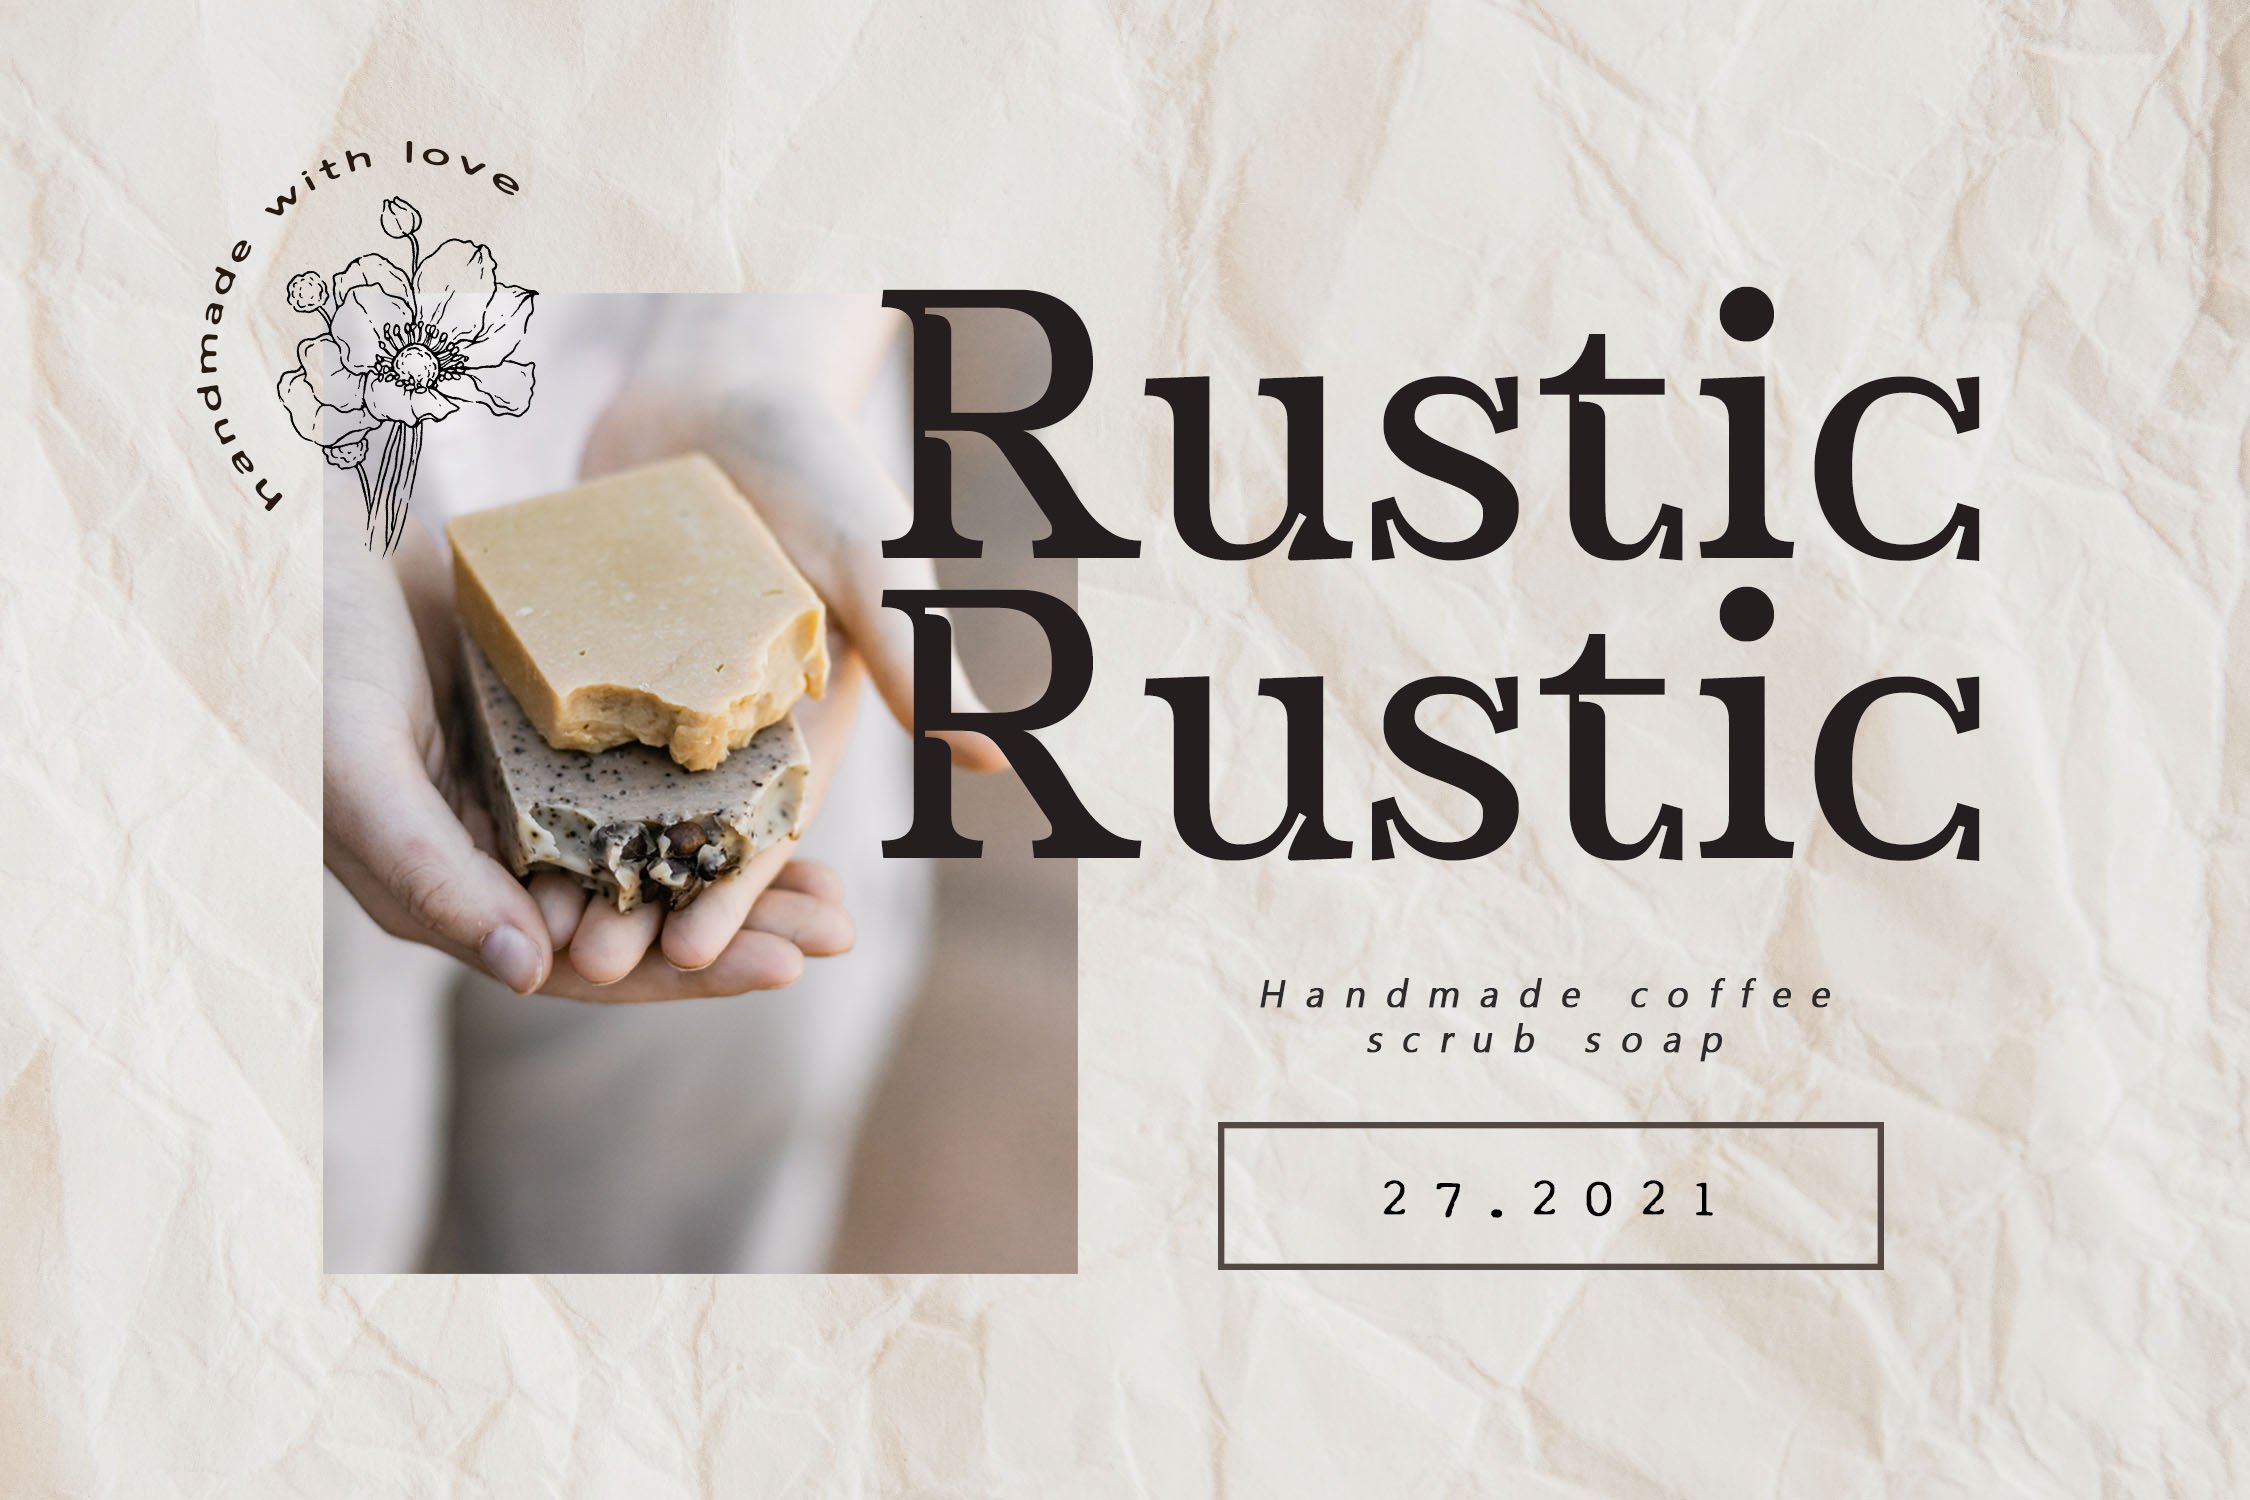 This font is a perfect solution for hand-made products.